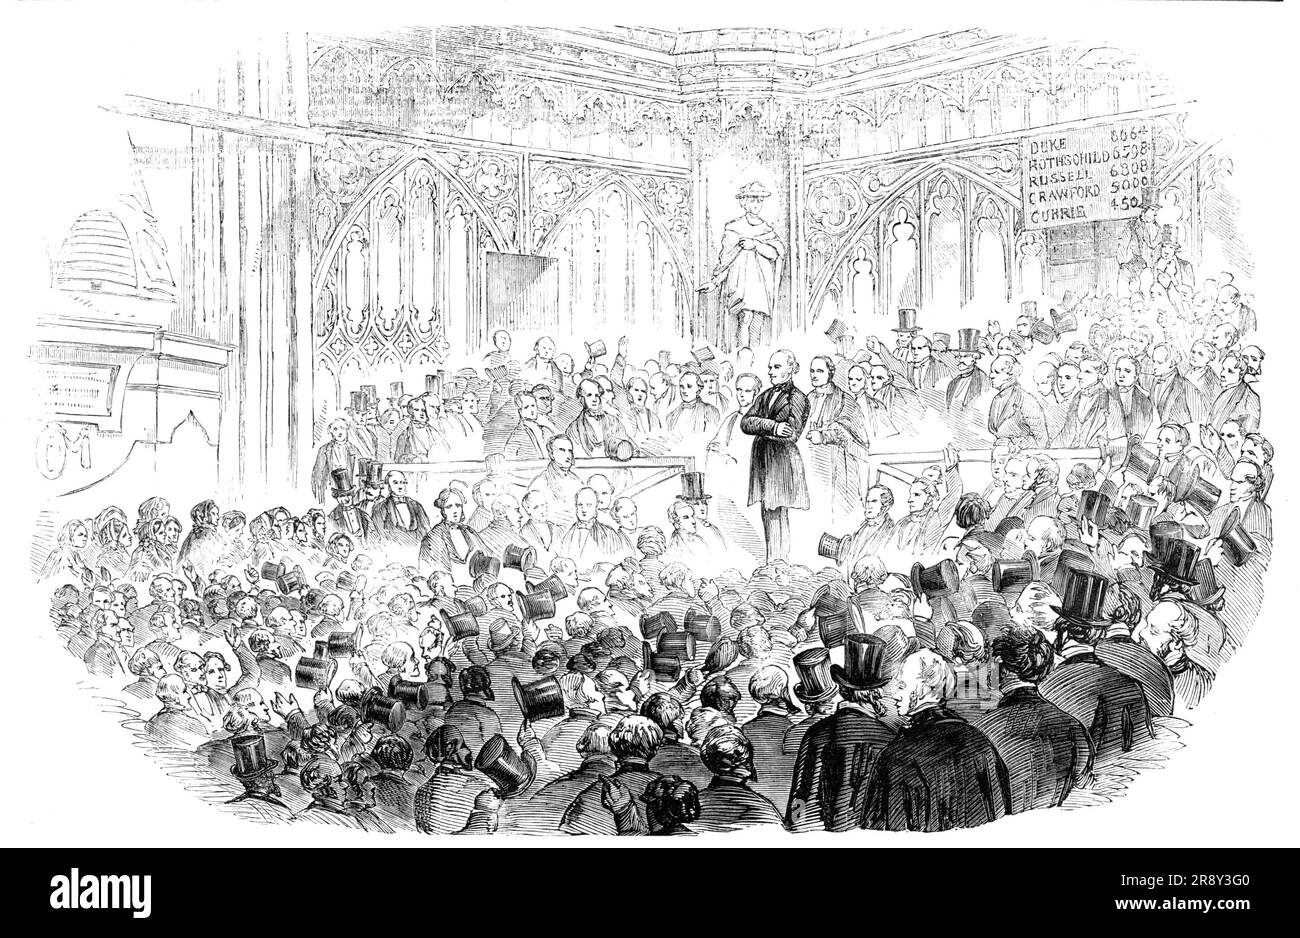 The City of London Election in Guildhall: Lord John Russell, M.P., returning thanks, 1857. 'Lord J. Russell, accompanied by various members of his committee, entered the hall, and took up a position on the hustings, amid loud cheers, which were vigorously renewed as the Guildhall clock indicated the close of the poll...[He] said: &quot;Gentlemen - You are no doubt aware that the time for the members returning thanks is when the poll is declared on Monday, and, as Baron Lionel Rothschild is not here, I should be very unwilling to make a speech at the present time, in his absence. Still, gentlem Stock Photo